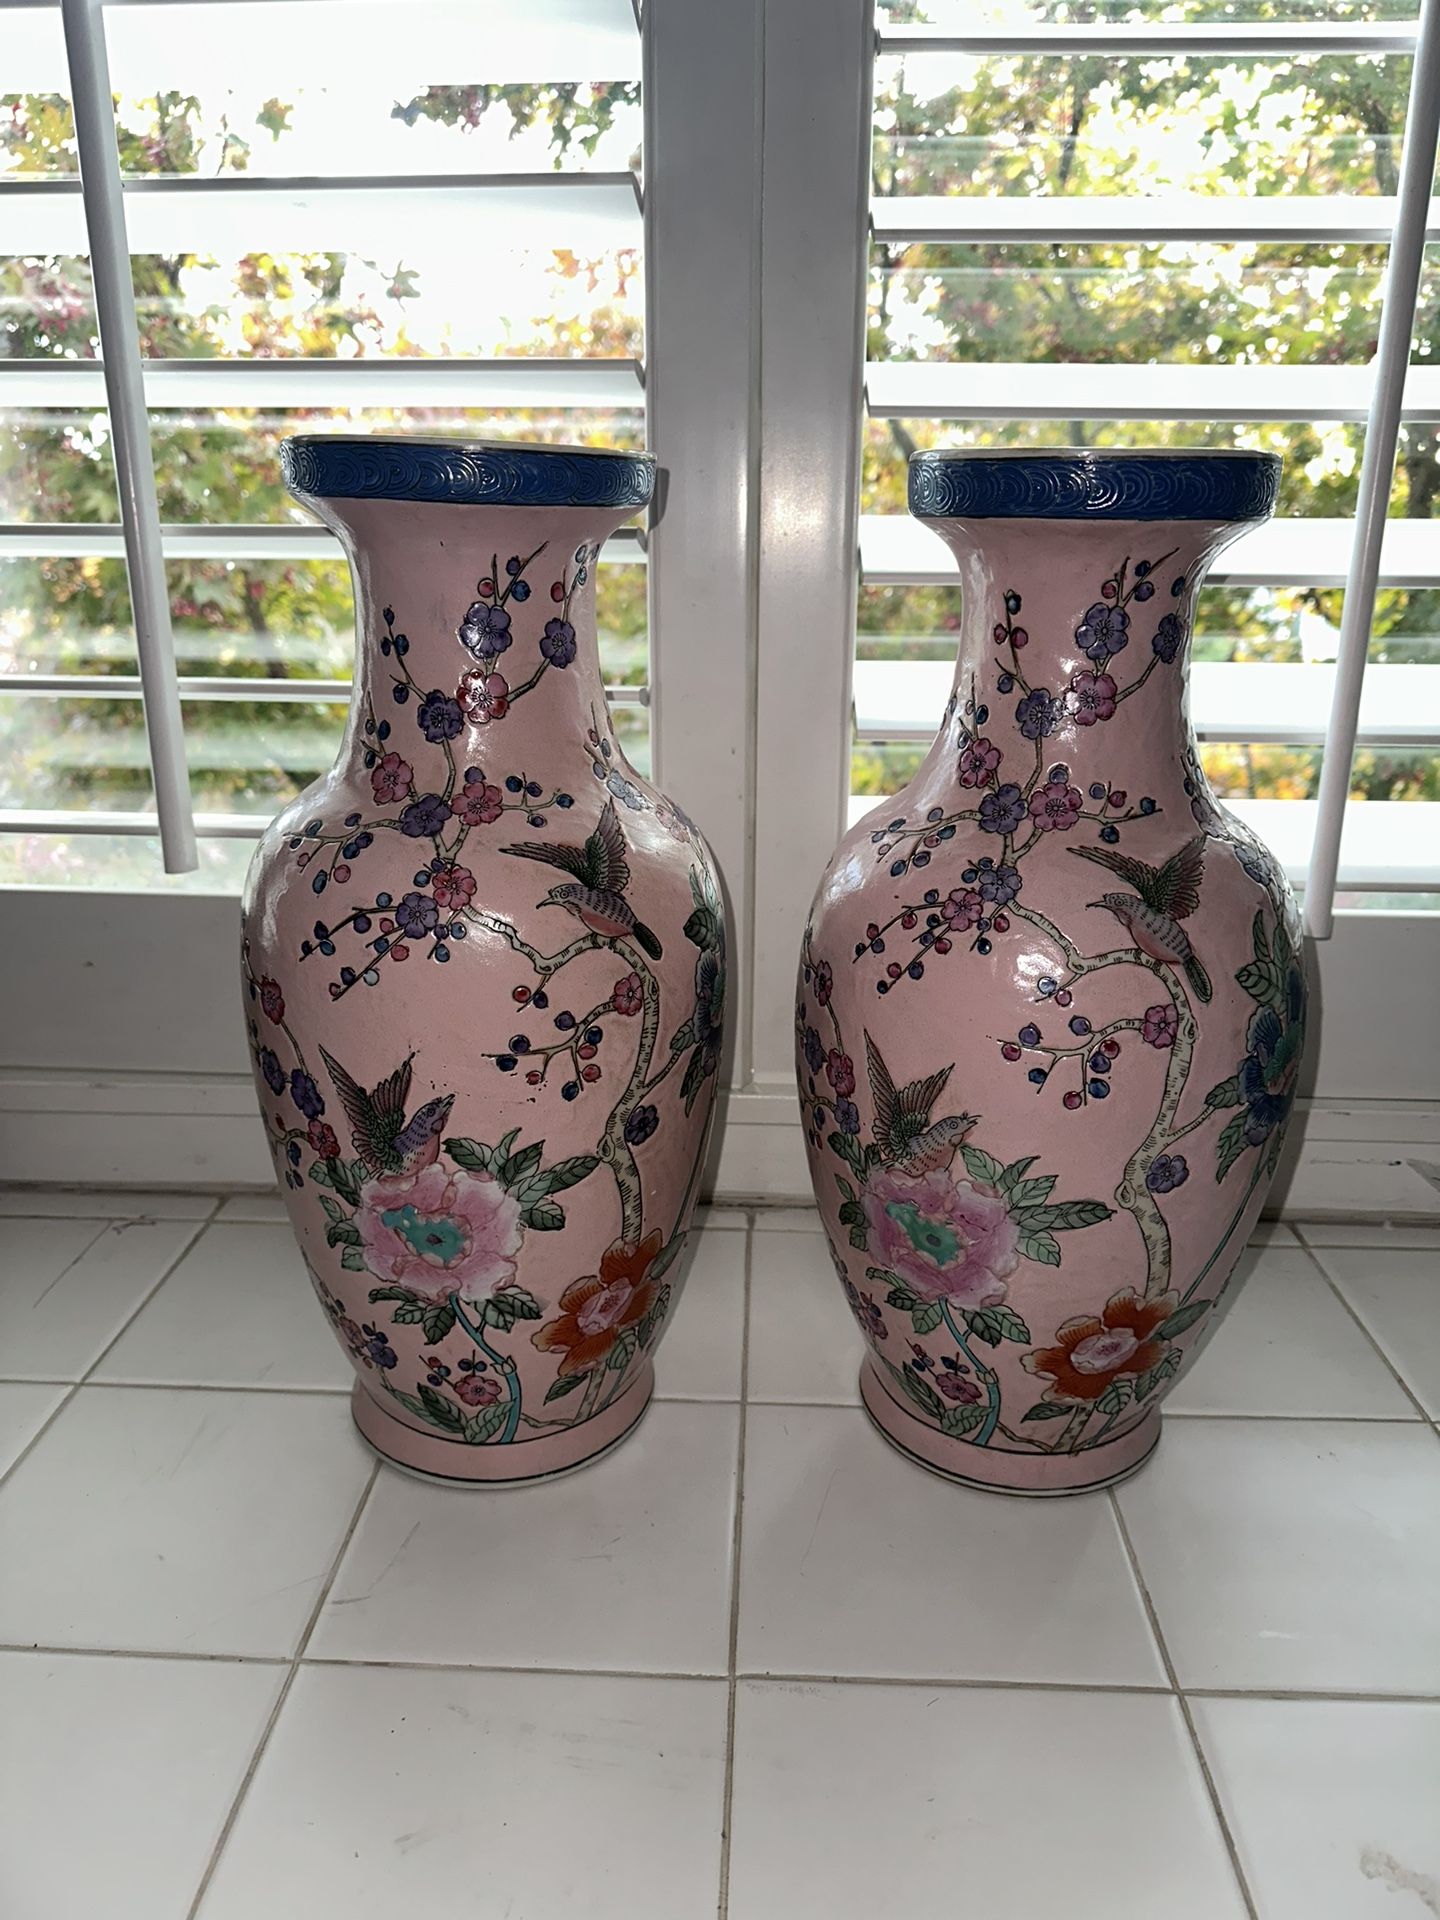 2 Large Vases Perfect For Flowers - Home Decor 